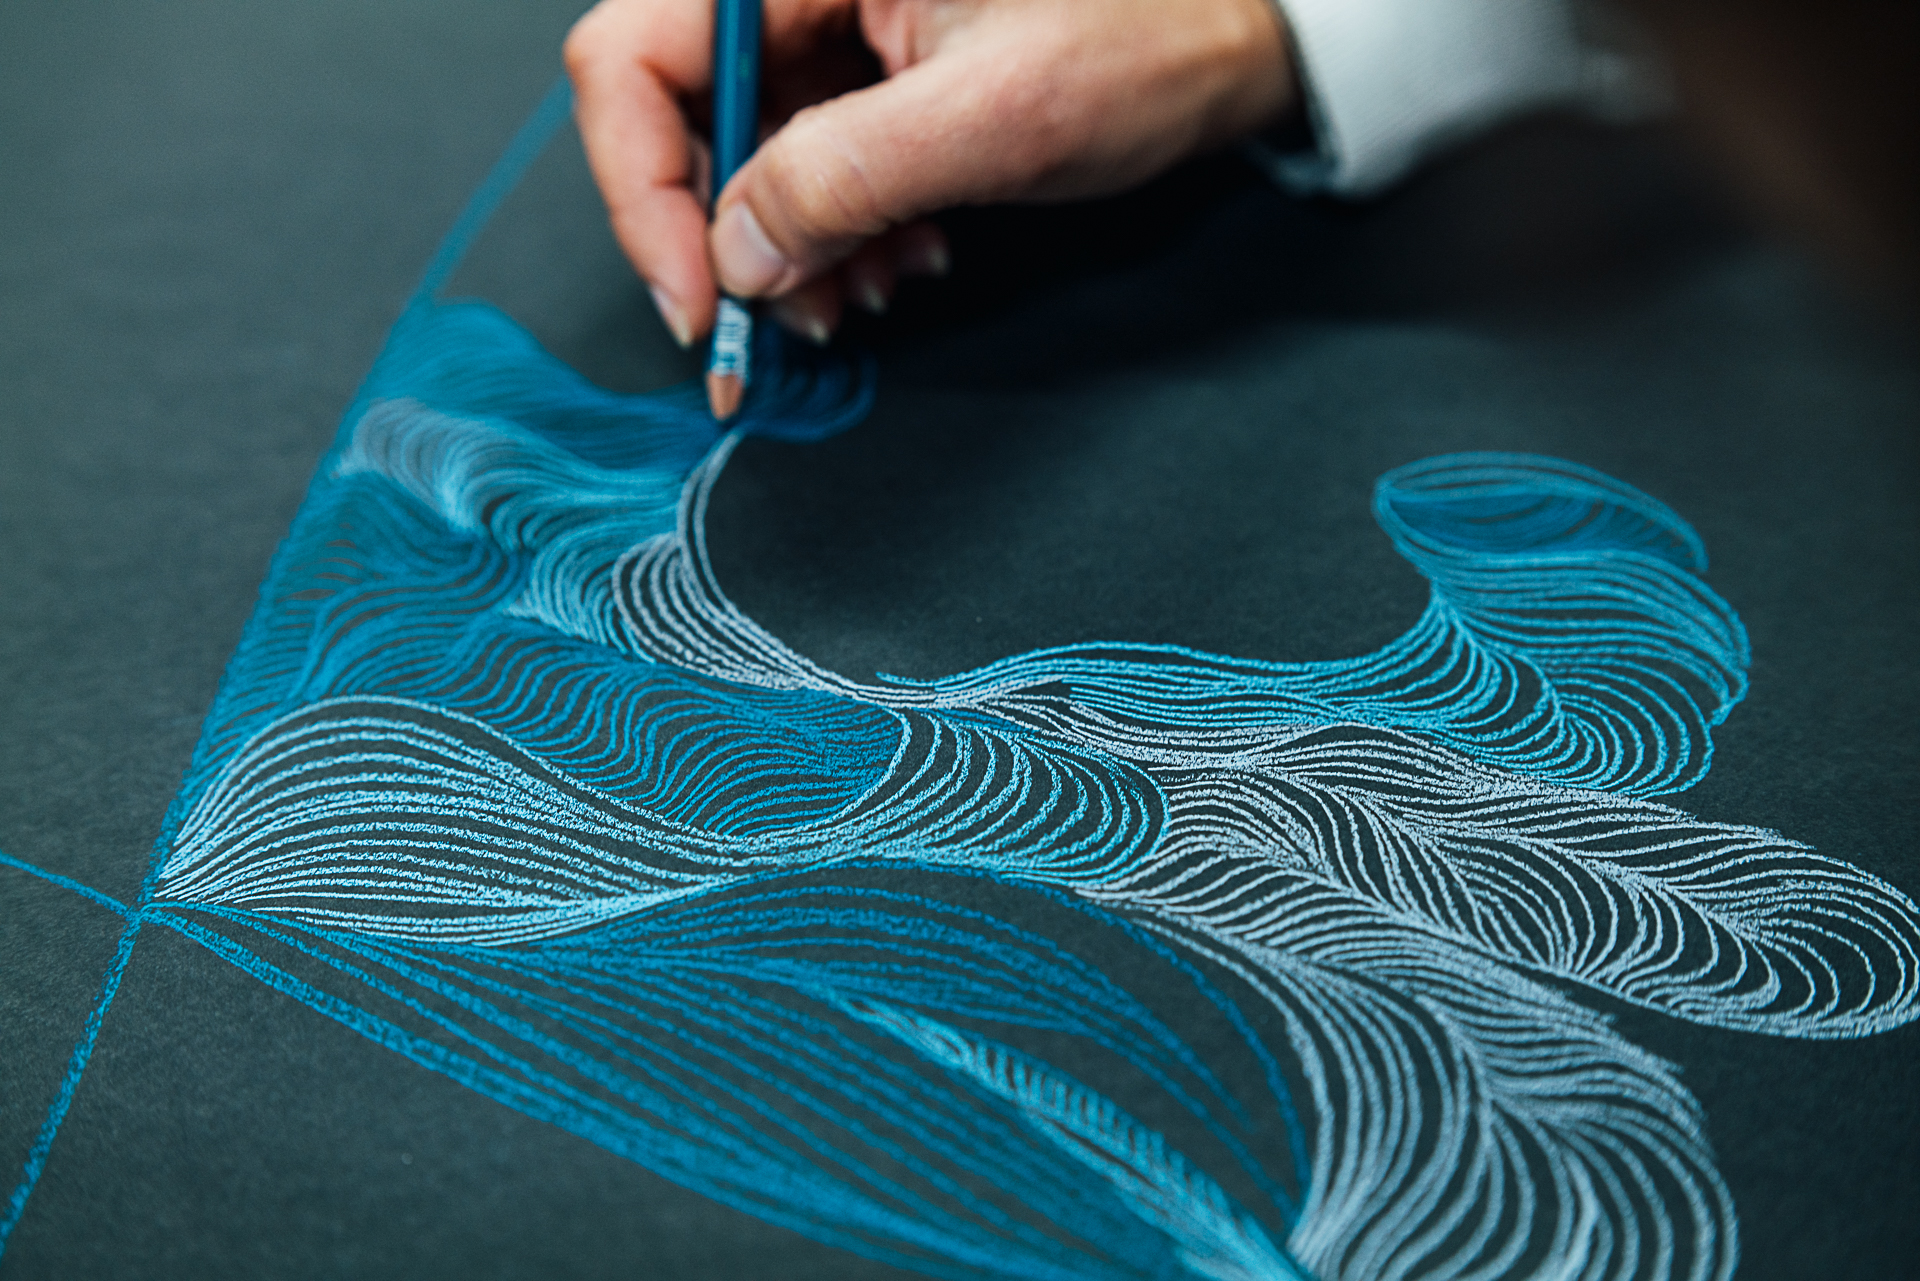 Hand holding pencils, drawing on black paper with blue pencil. Drawing features lots of wave-like, swirling lines.